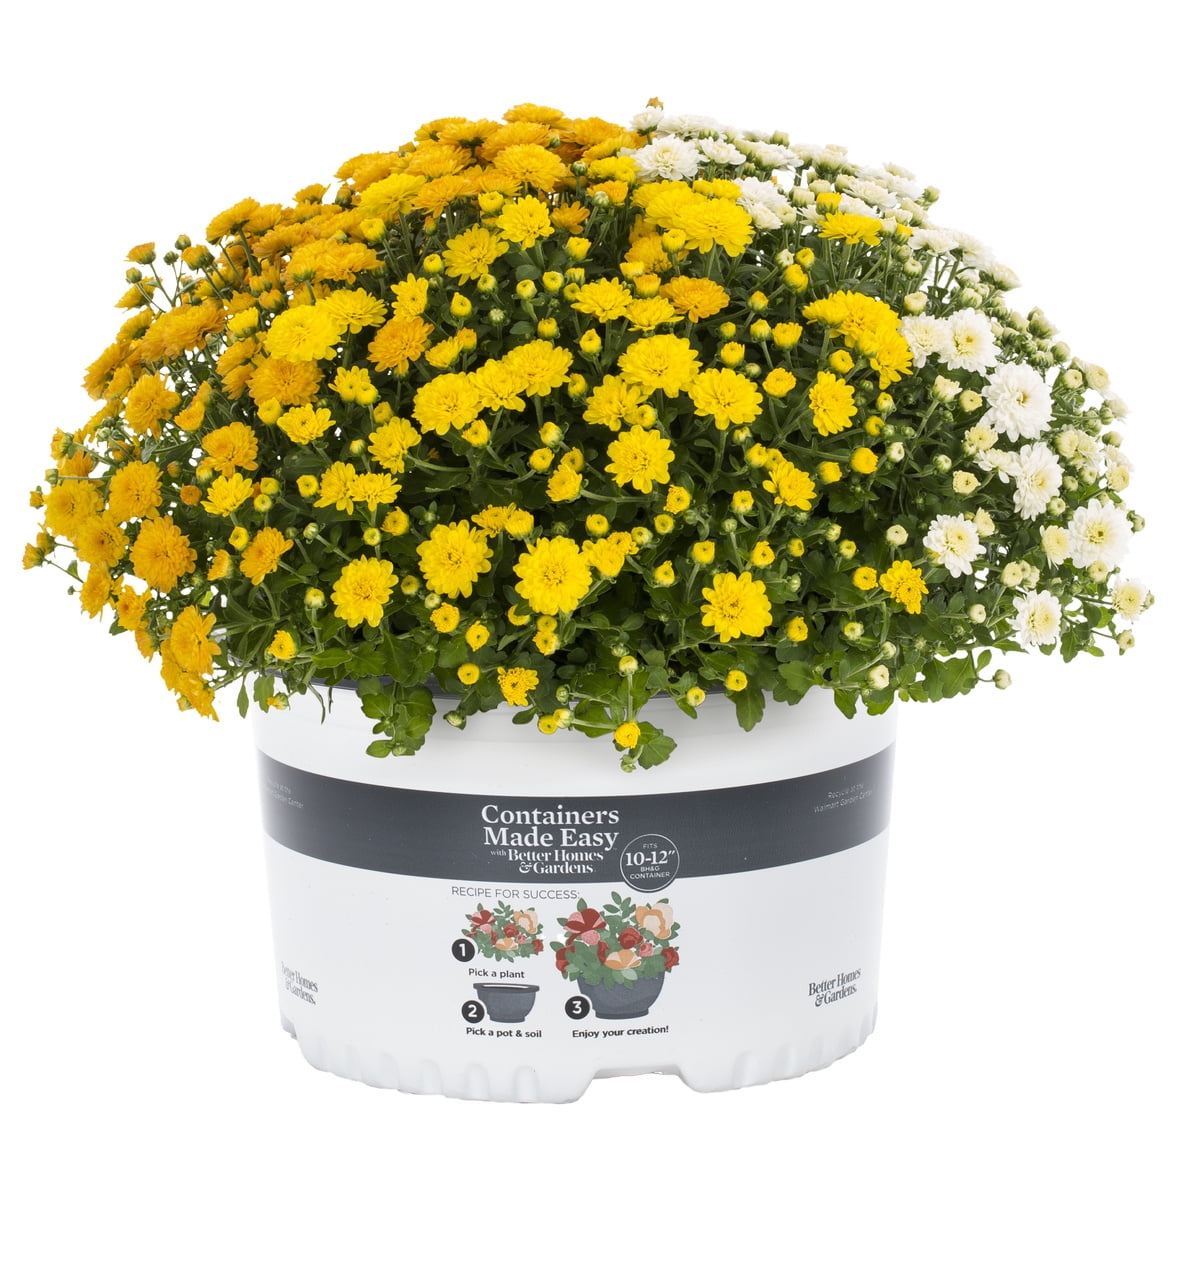 burgemeester leven Ounce Containers Made Easy with Better Homes & Gardens 1.5G Multicolor Orange  White Yellow Mum (1 Count) Live Plant with Easy Pop-In Container -  Walmart.com